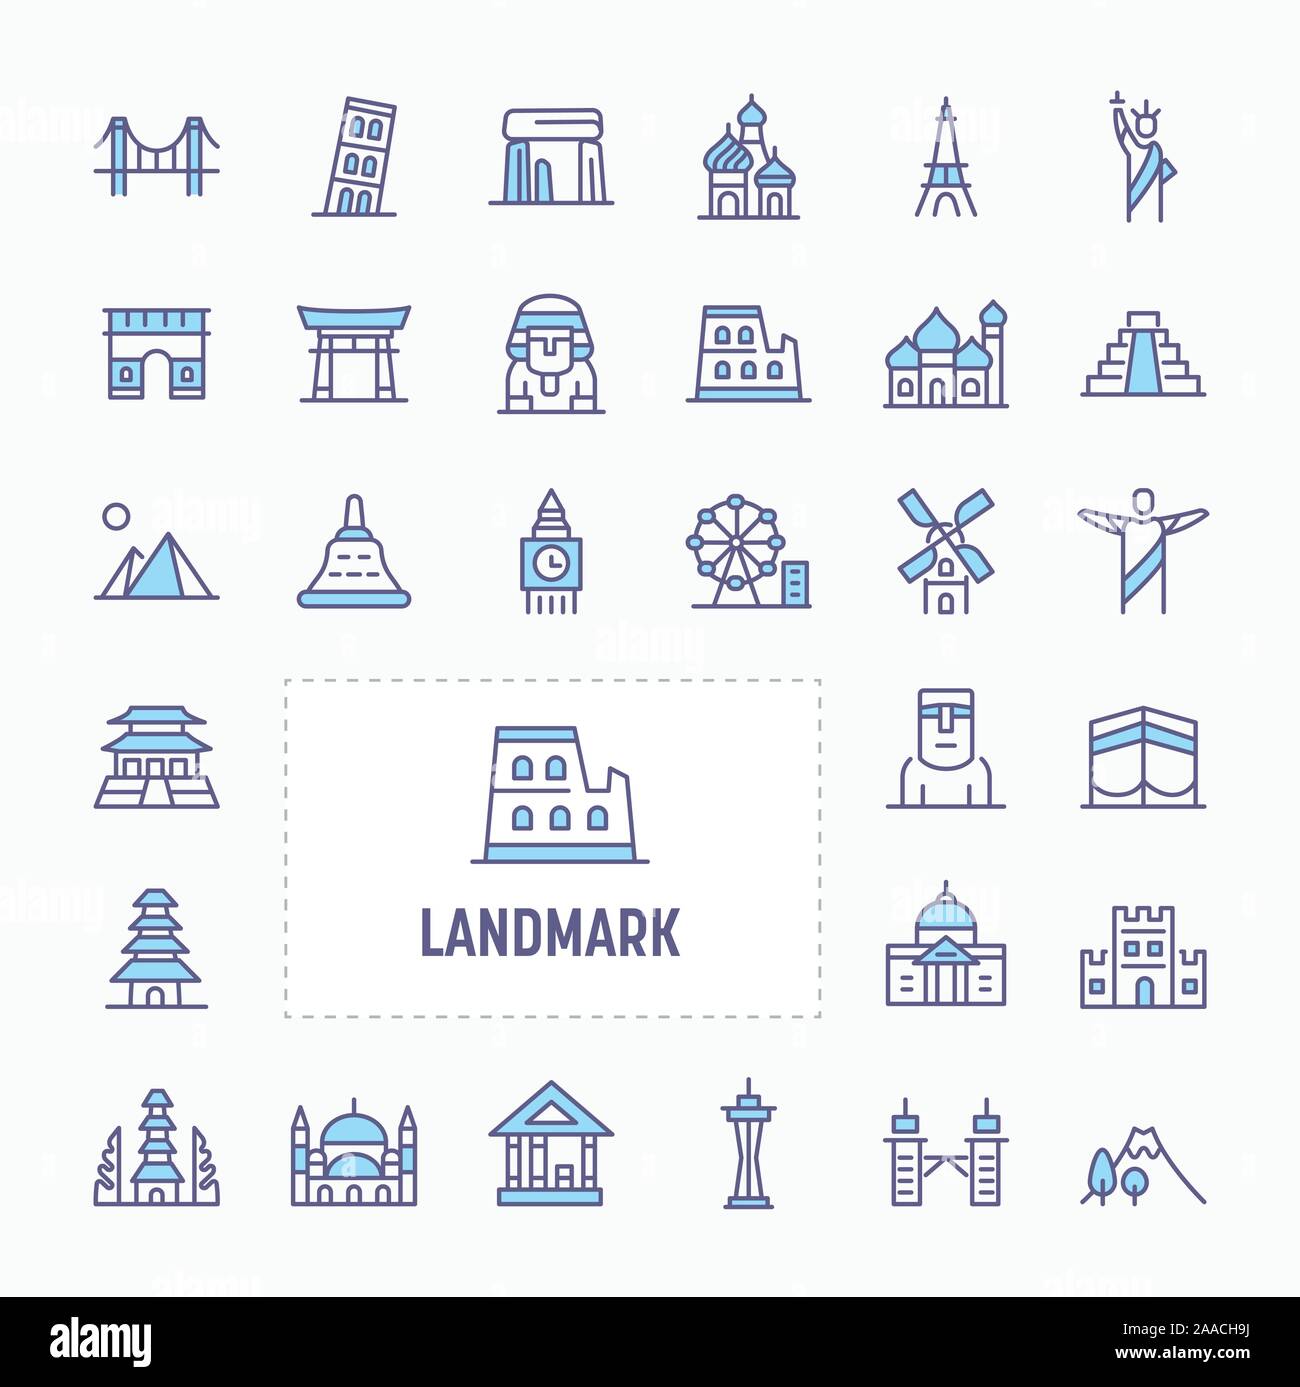 world's landmark and buildings - thin line website, application & presentation icon. simple and minimal vector icon and illustration collection. Stock Vector